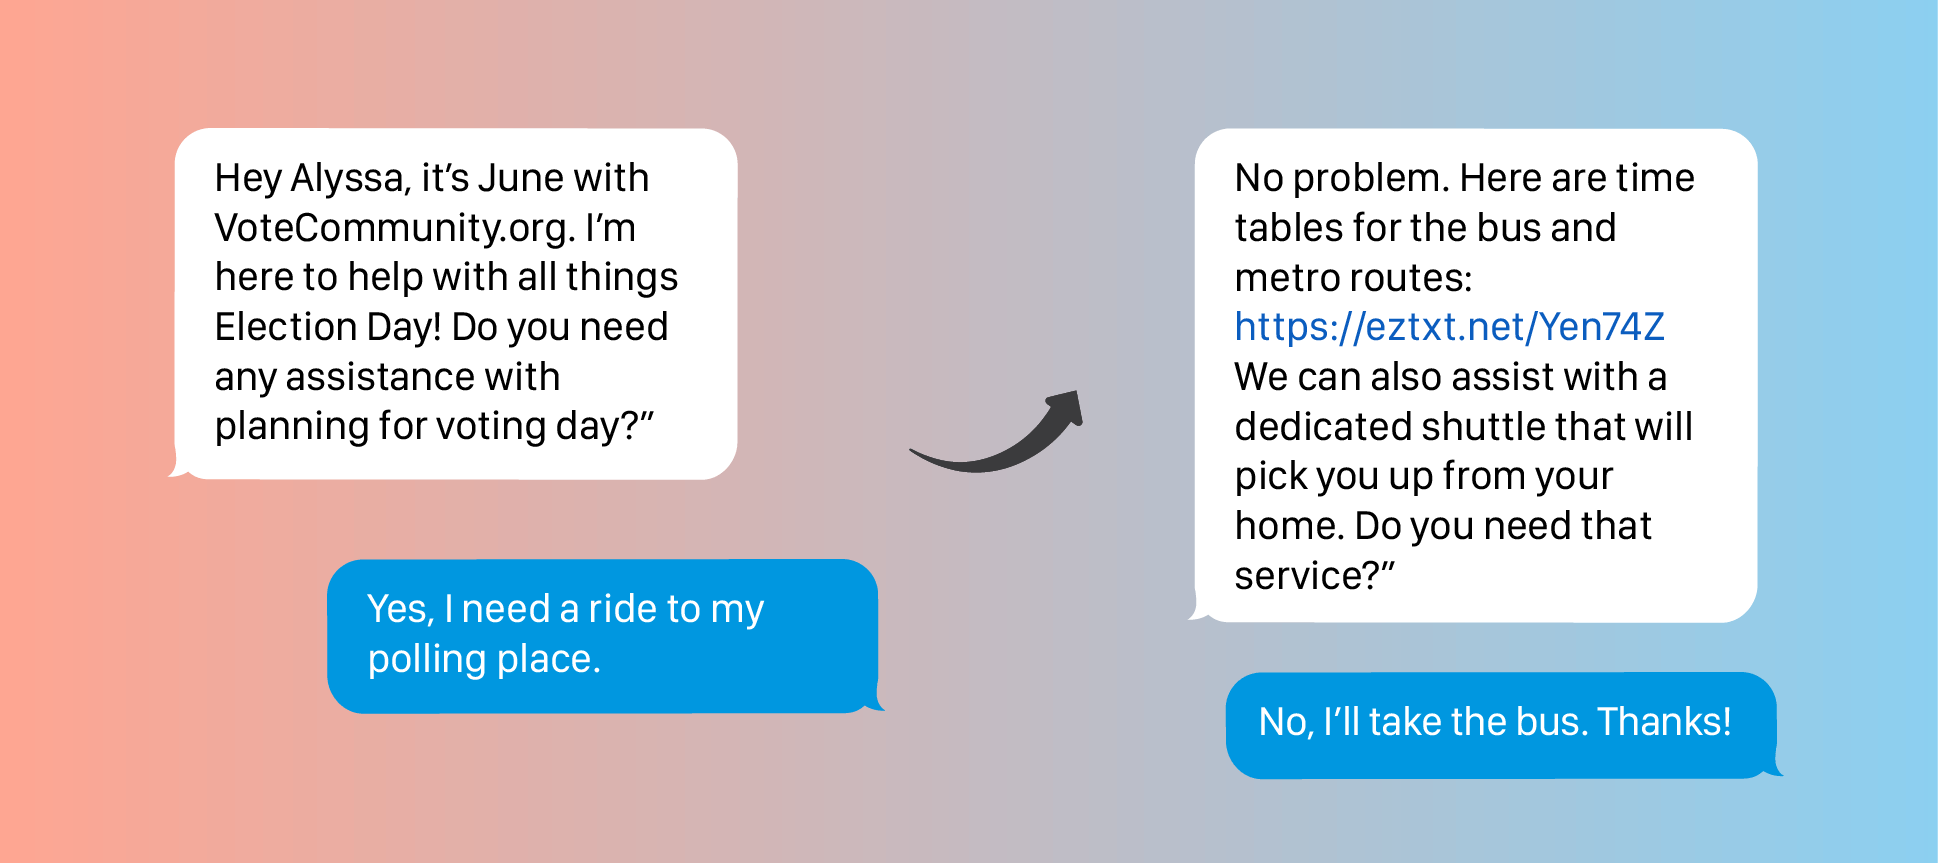 Two sample text messages side-by-side